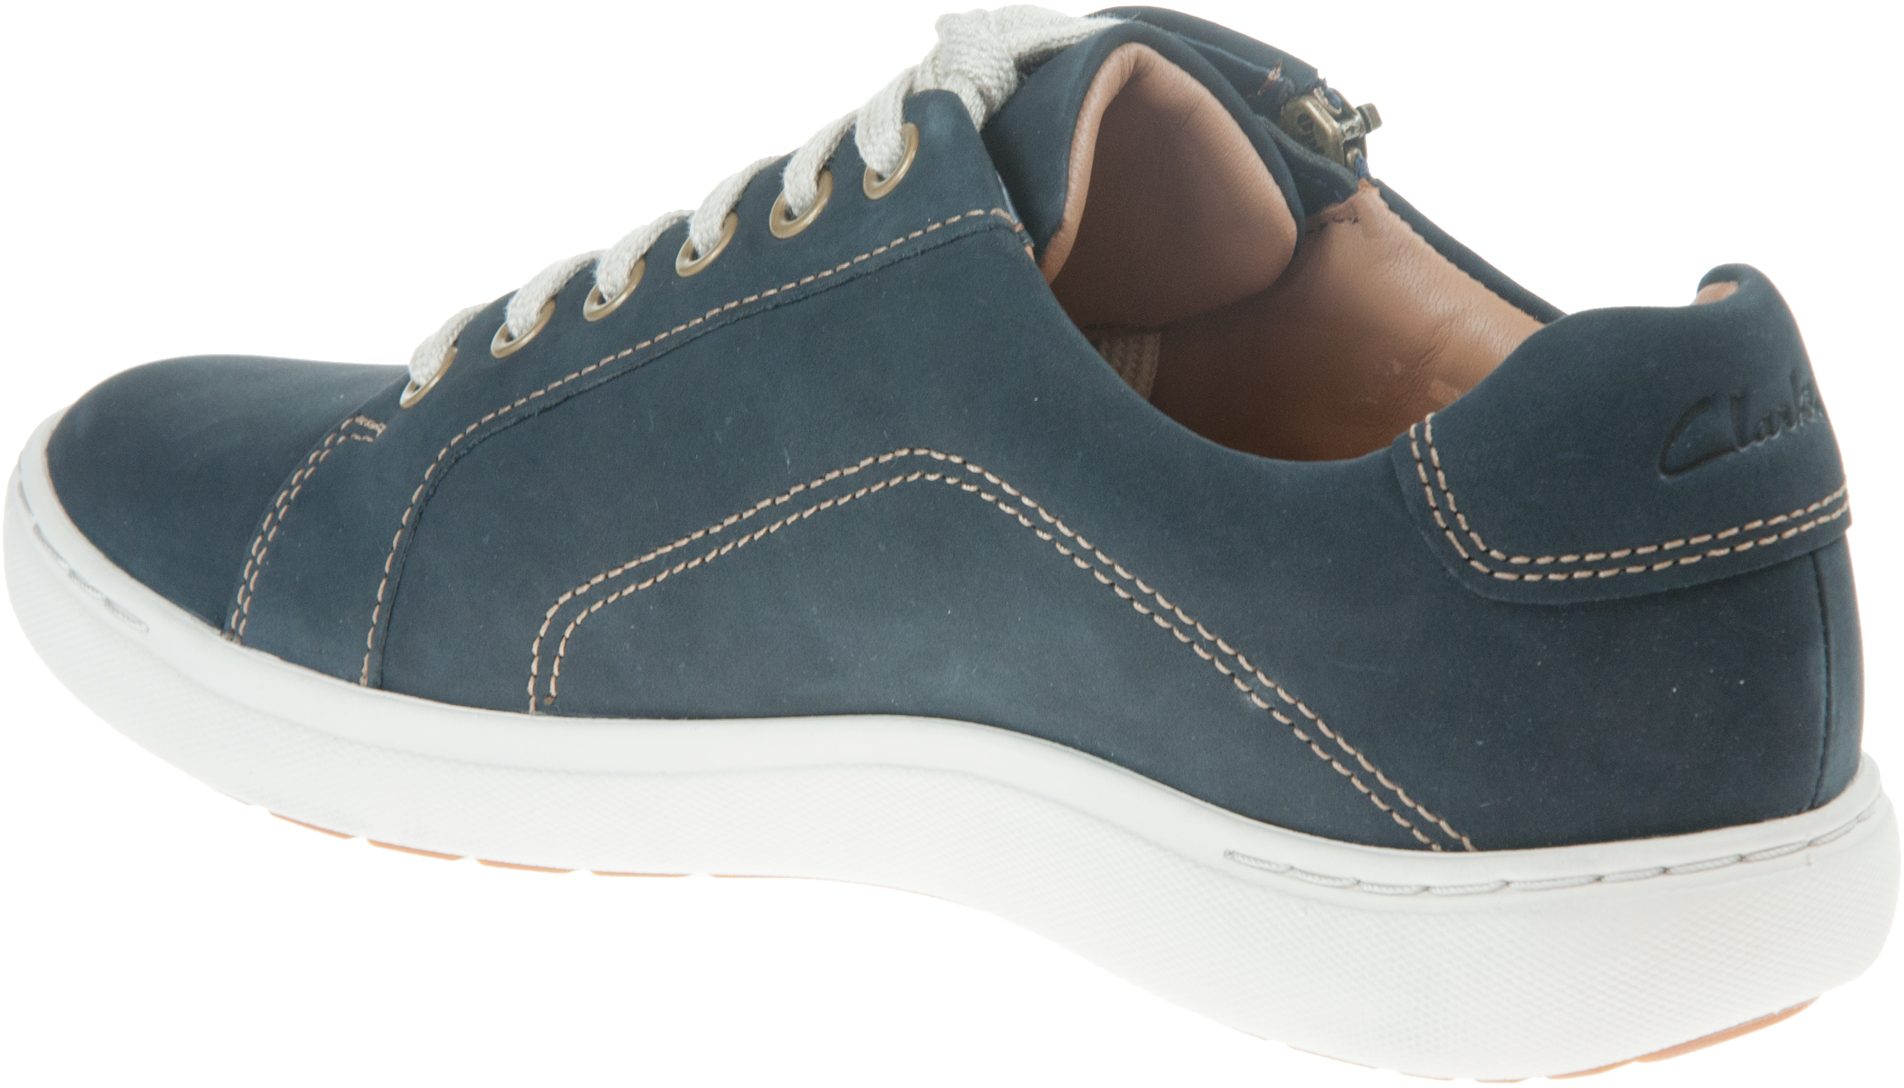 Clarks Nalle Lace Navy Nubuck 26163570 - Everyday Shoes - Humphries Shoes